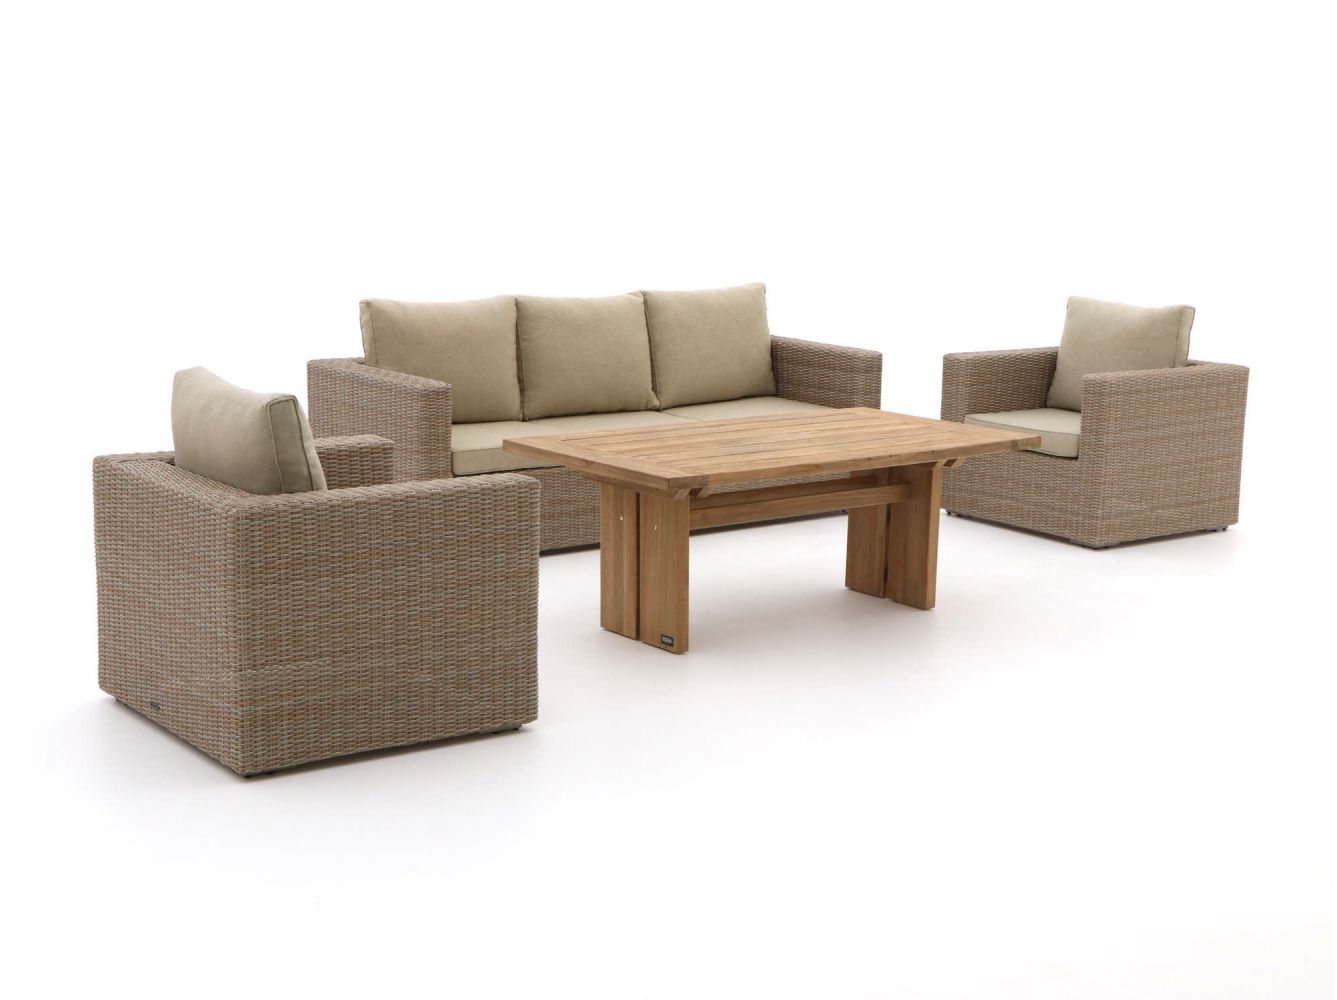 da019fc5de8b39ab01c500d85aabcdc3b241d179 118124 p01 mugghrhjqpuhr03c - Intenso Carpino/ROUGH-L dining loungeset 4-delig